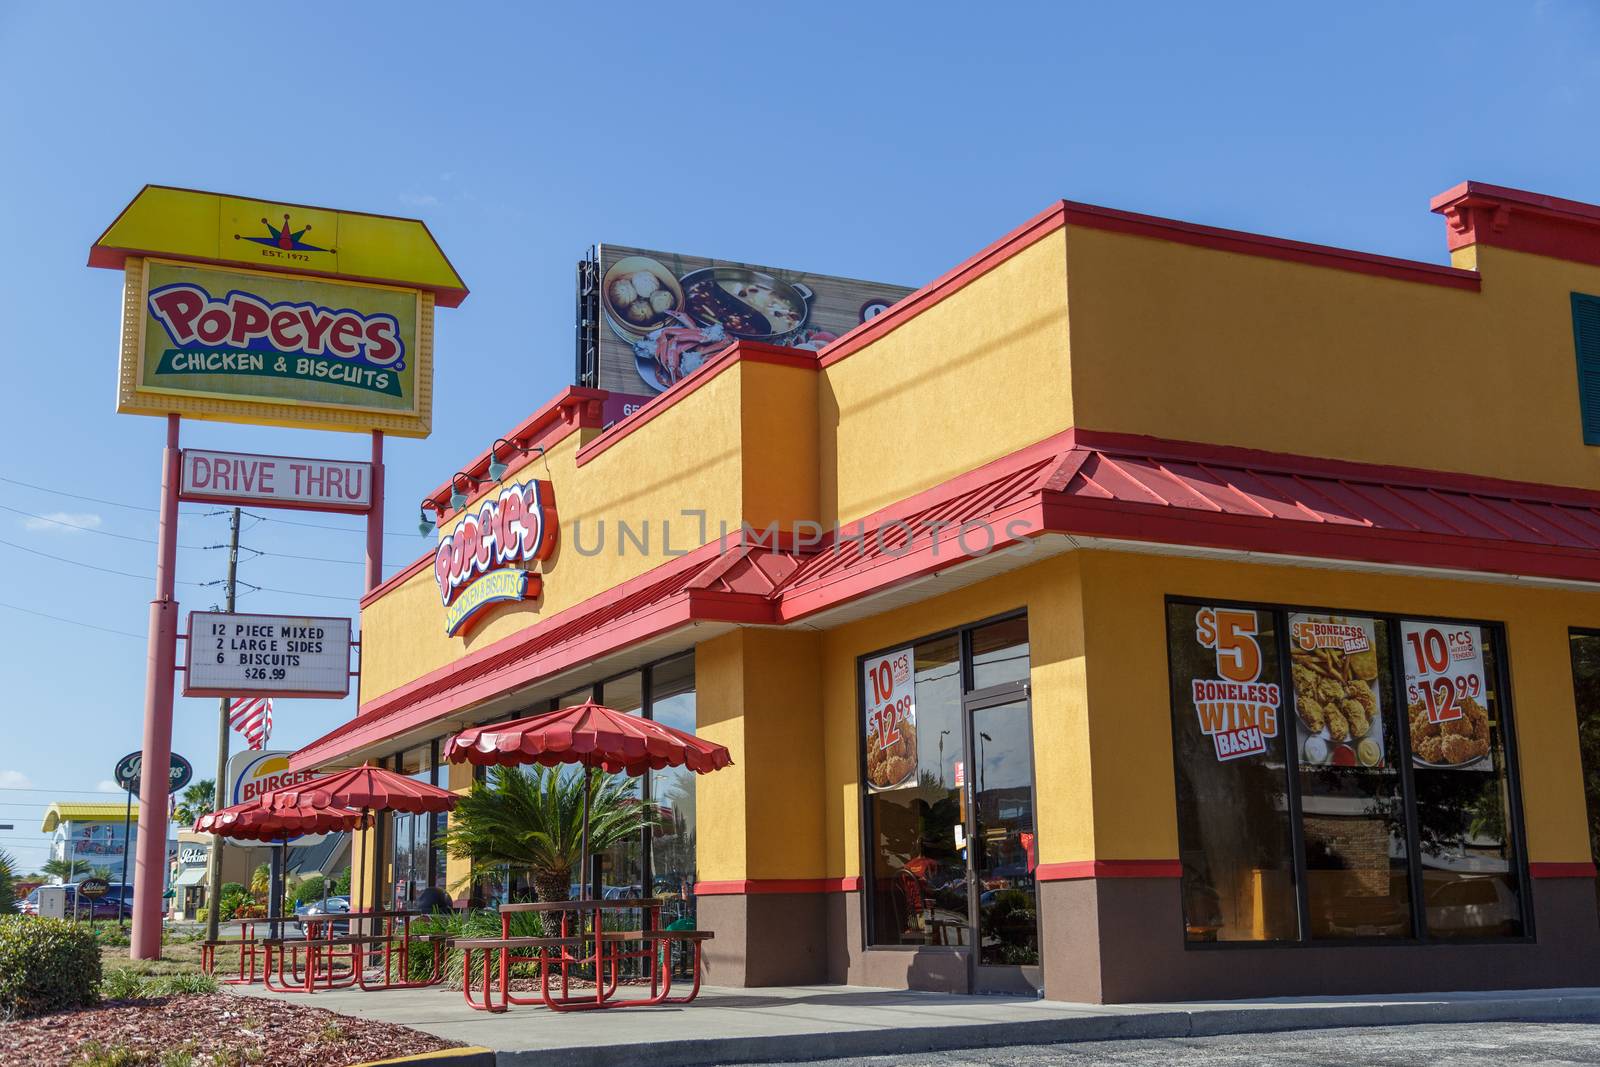 Orlando, Florida, USA - CIRCA, 2019: Popeyes restaurant building, which served fried chicken and New Orleans style cuisine for years, now adds a traditional chicken sandwich to the menu.